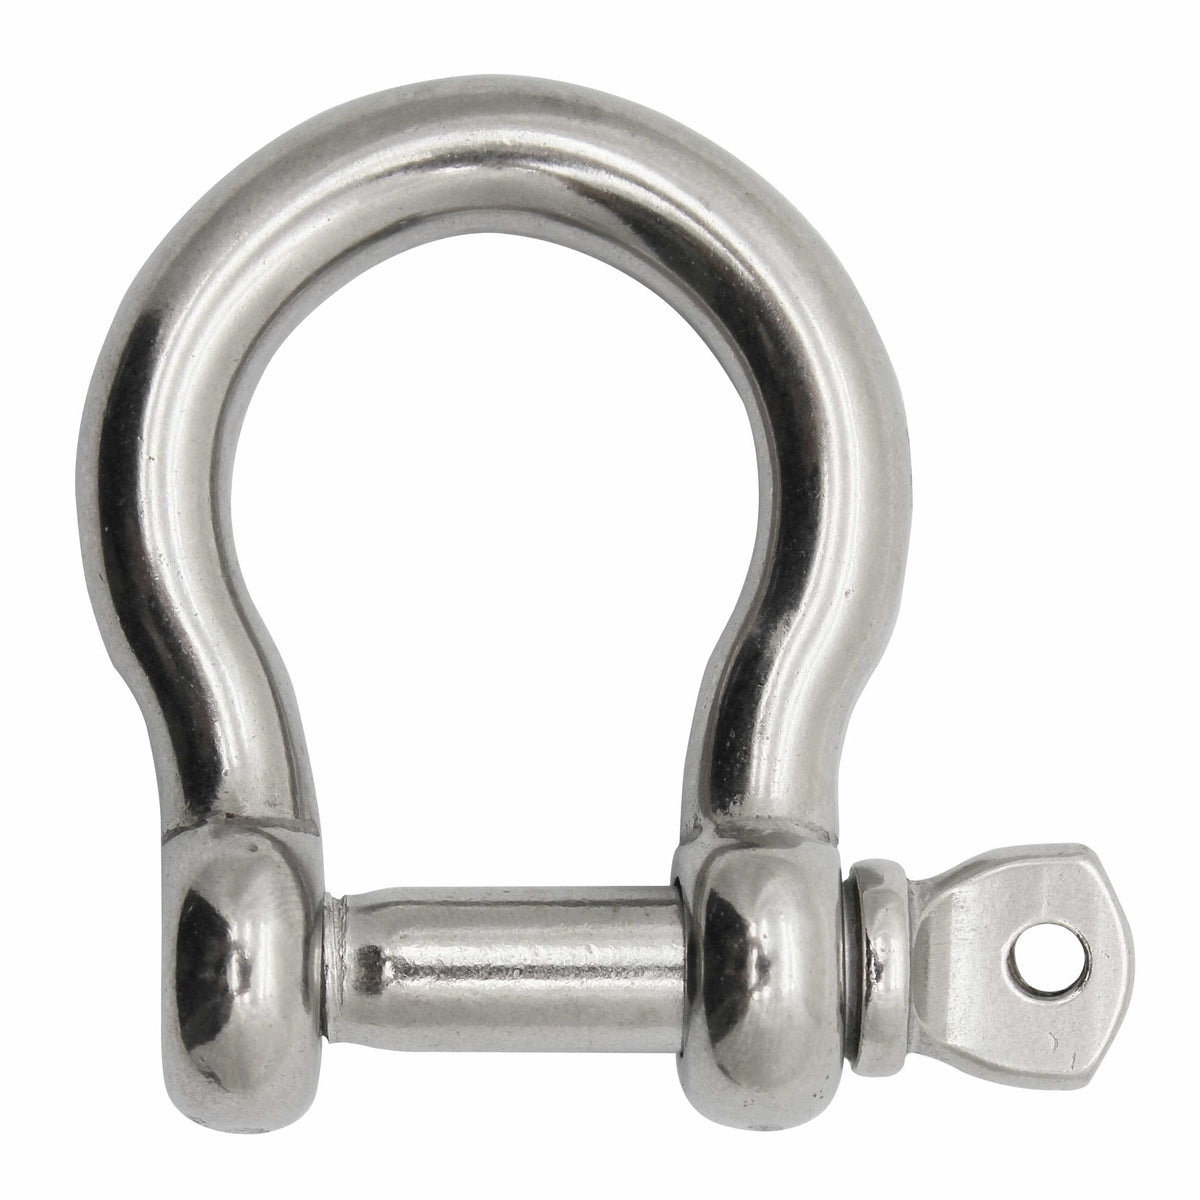 Extreme Max BoatTector SS Bow Shackle 5/16" #3006.8291